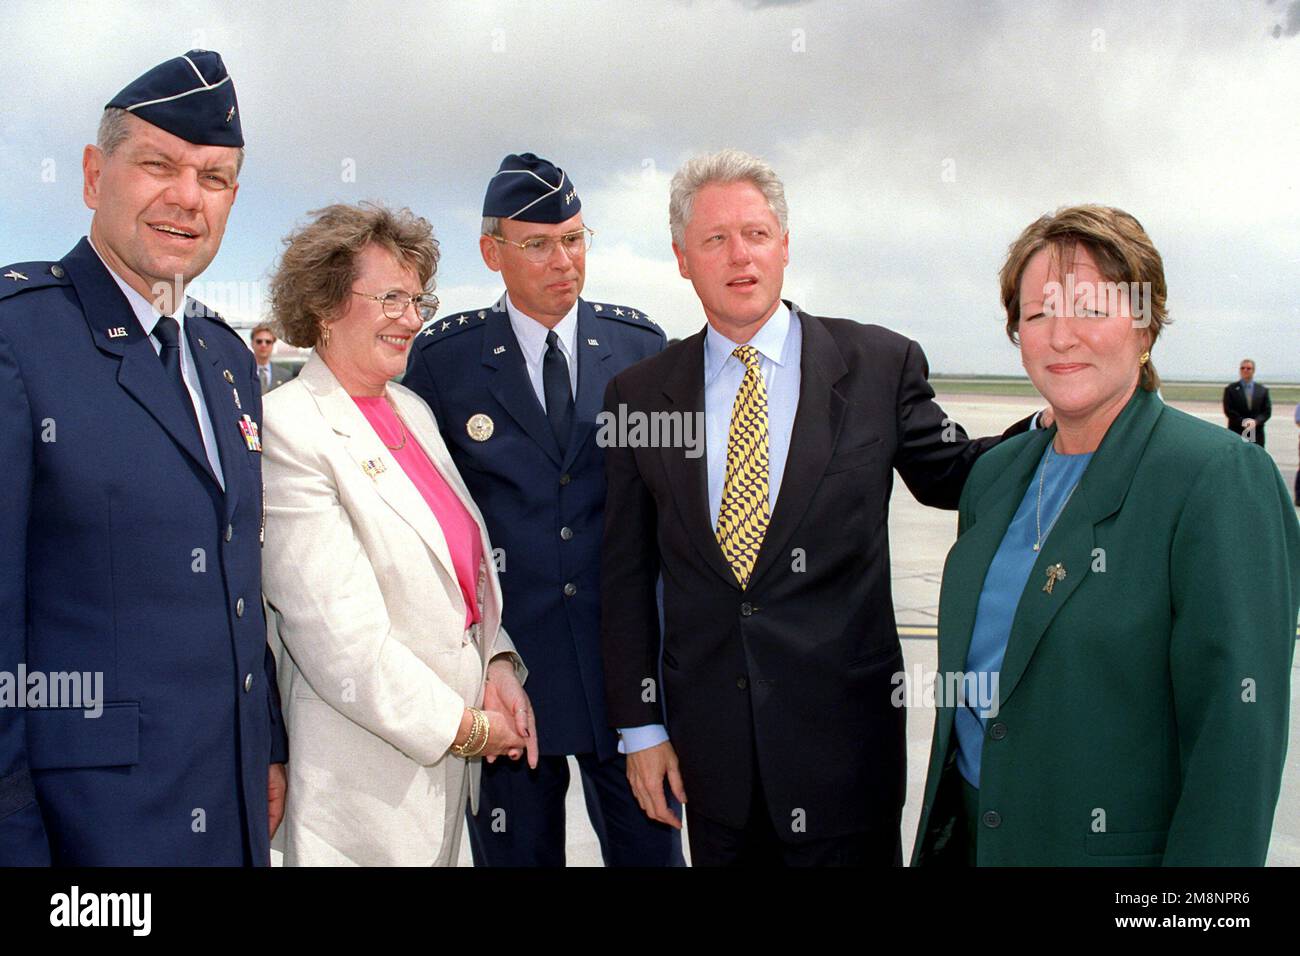 President William Jefferson Clinton (2nd from right), with (L to R) US Air Force Brigadier General Jerry M. Drennan, Commander, 21st Space Wing, Peterson Air Force Base, Colorado, Mrs. Lord, USAF Lieutenant General Lance W. Lord, Vice Commander, Air Force Space Command, Peterson AFB, CO, and Mrs. Drennan. President Clinton is preparing to depart Peterson AFB, CO, after a visit. Base: Peterson Air Force Base State: Colorado (CO) Country: United States Of America (USA) Stock Photo